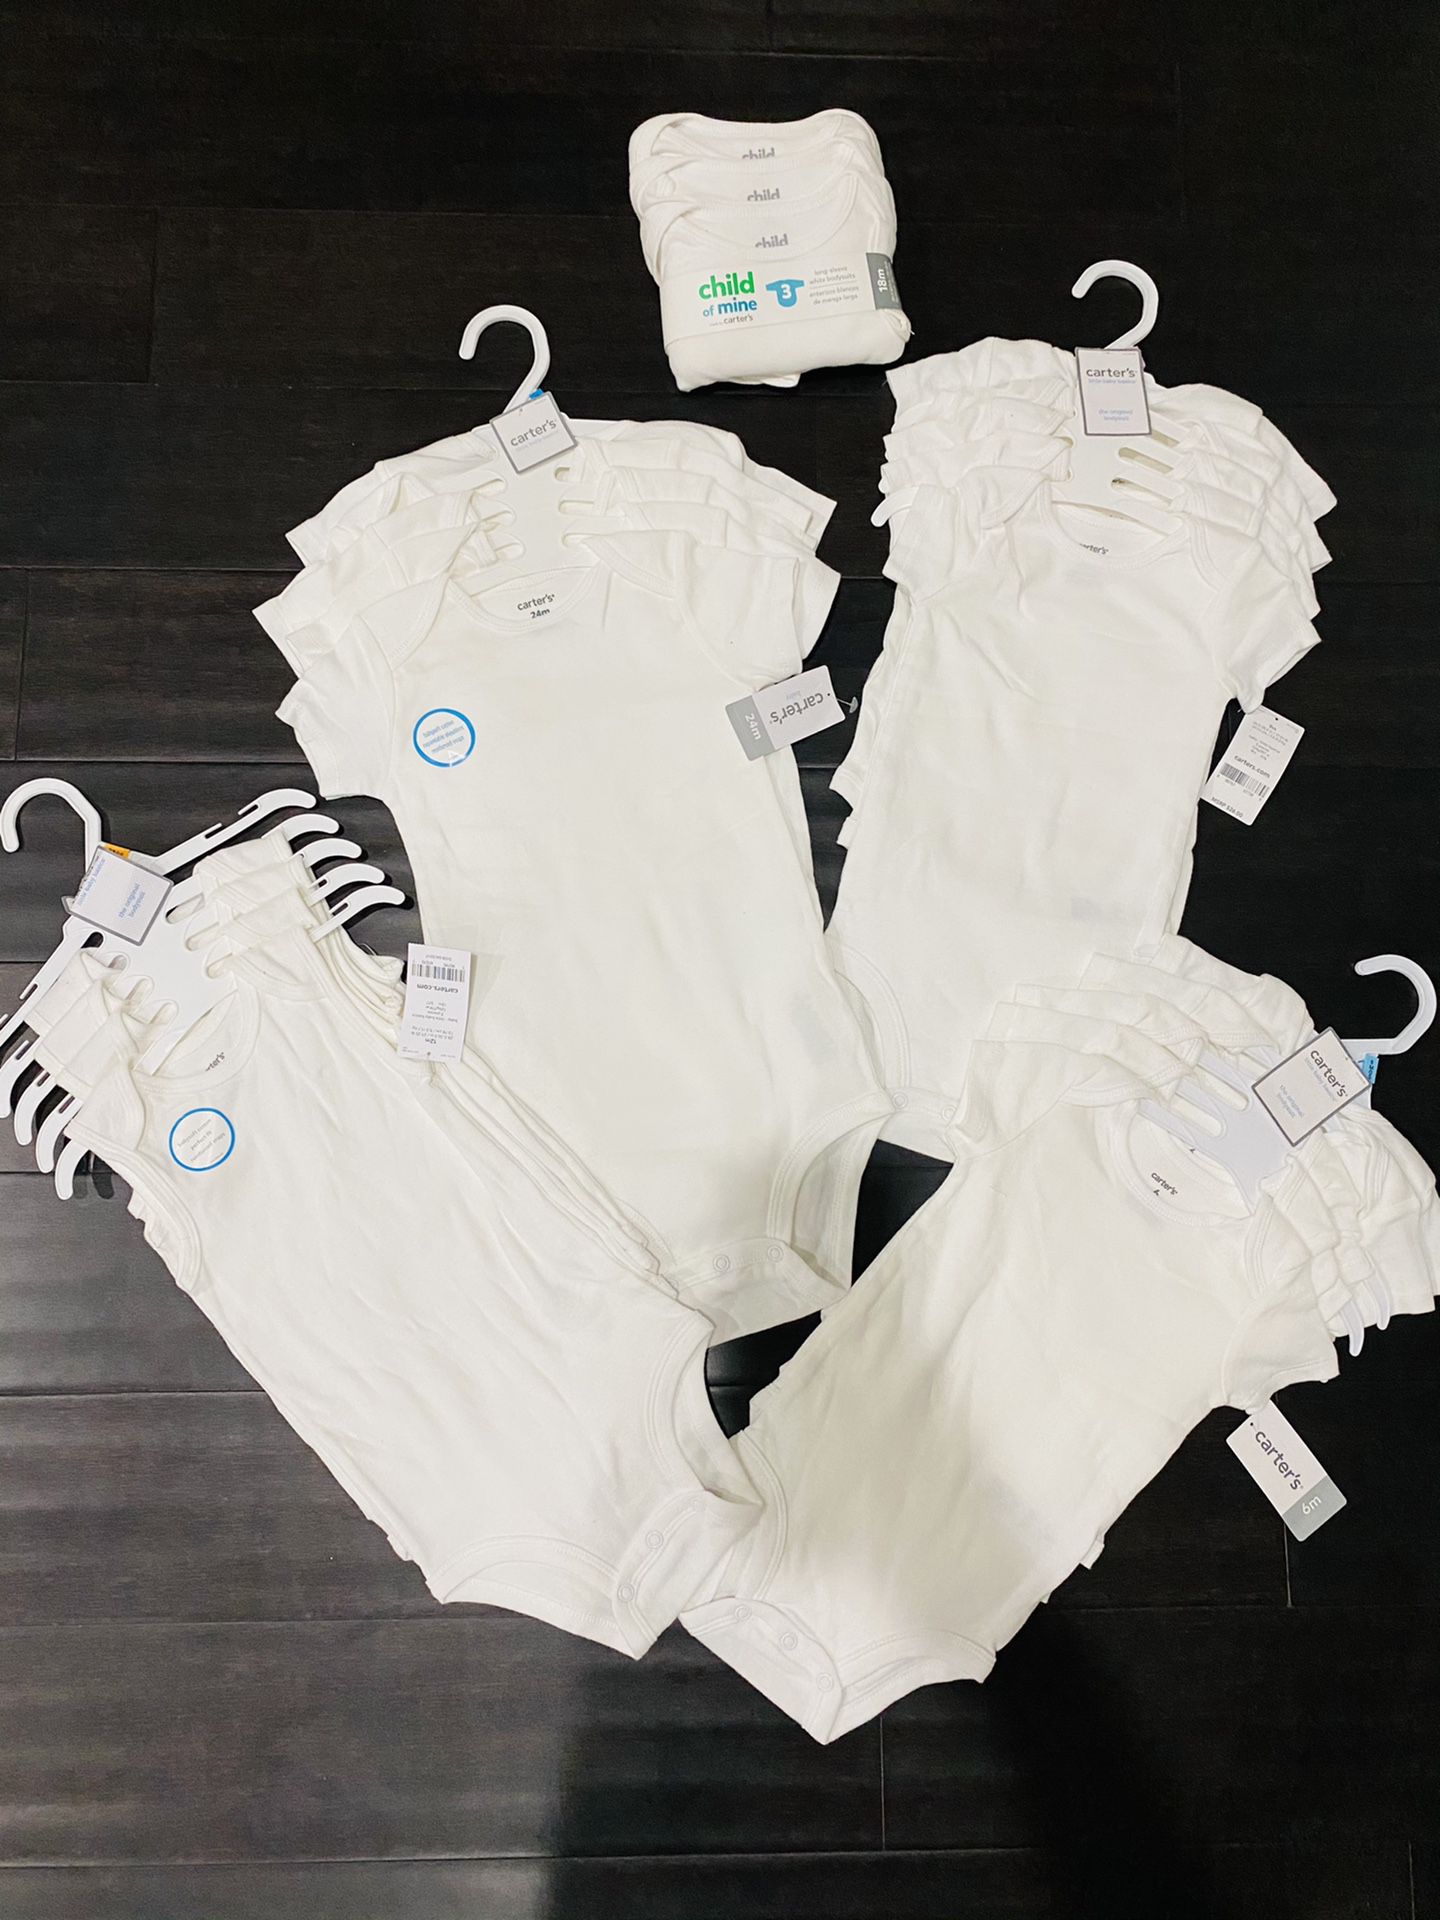 New Carter’s Baby Onesies 6, 9, 12, 18, 24 months